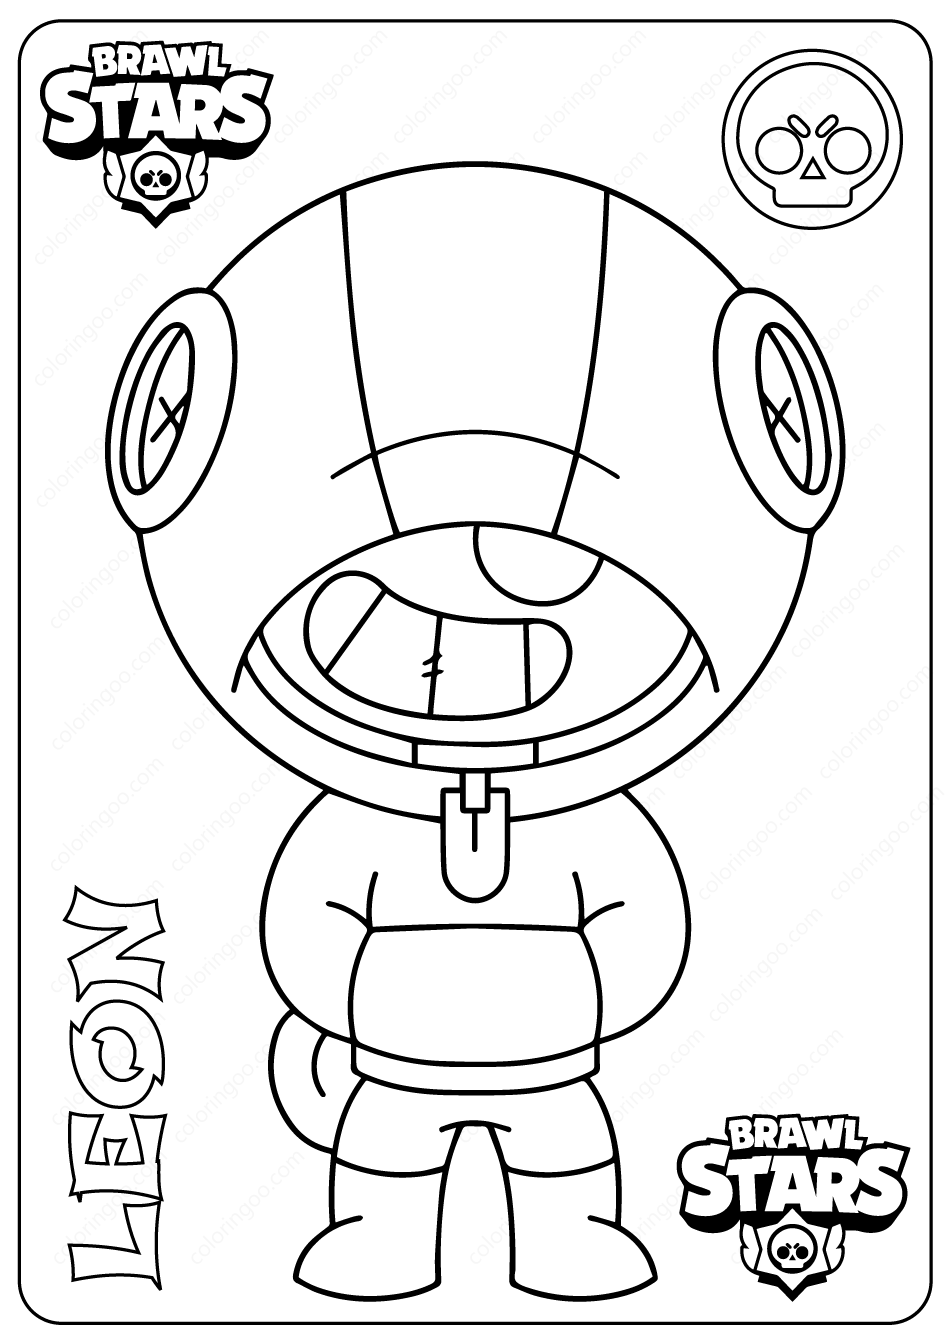 brawl stars leon printable coloring pages